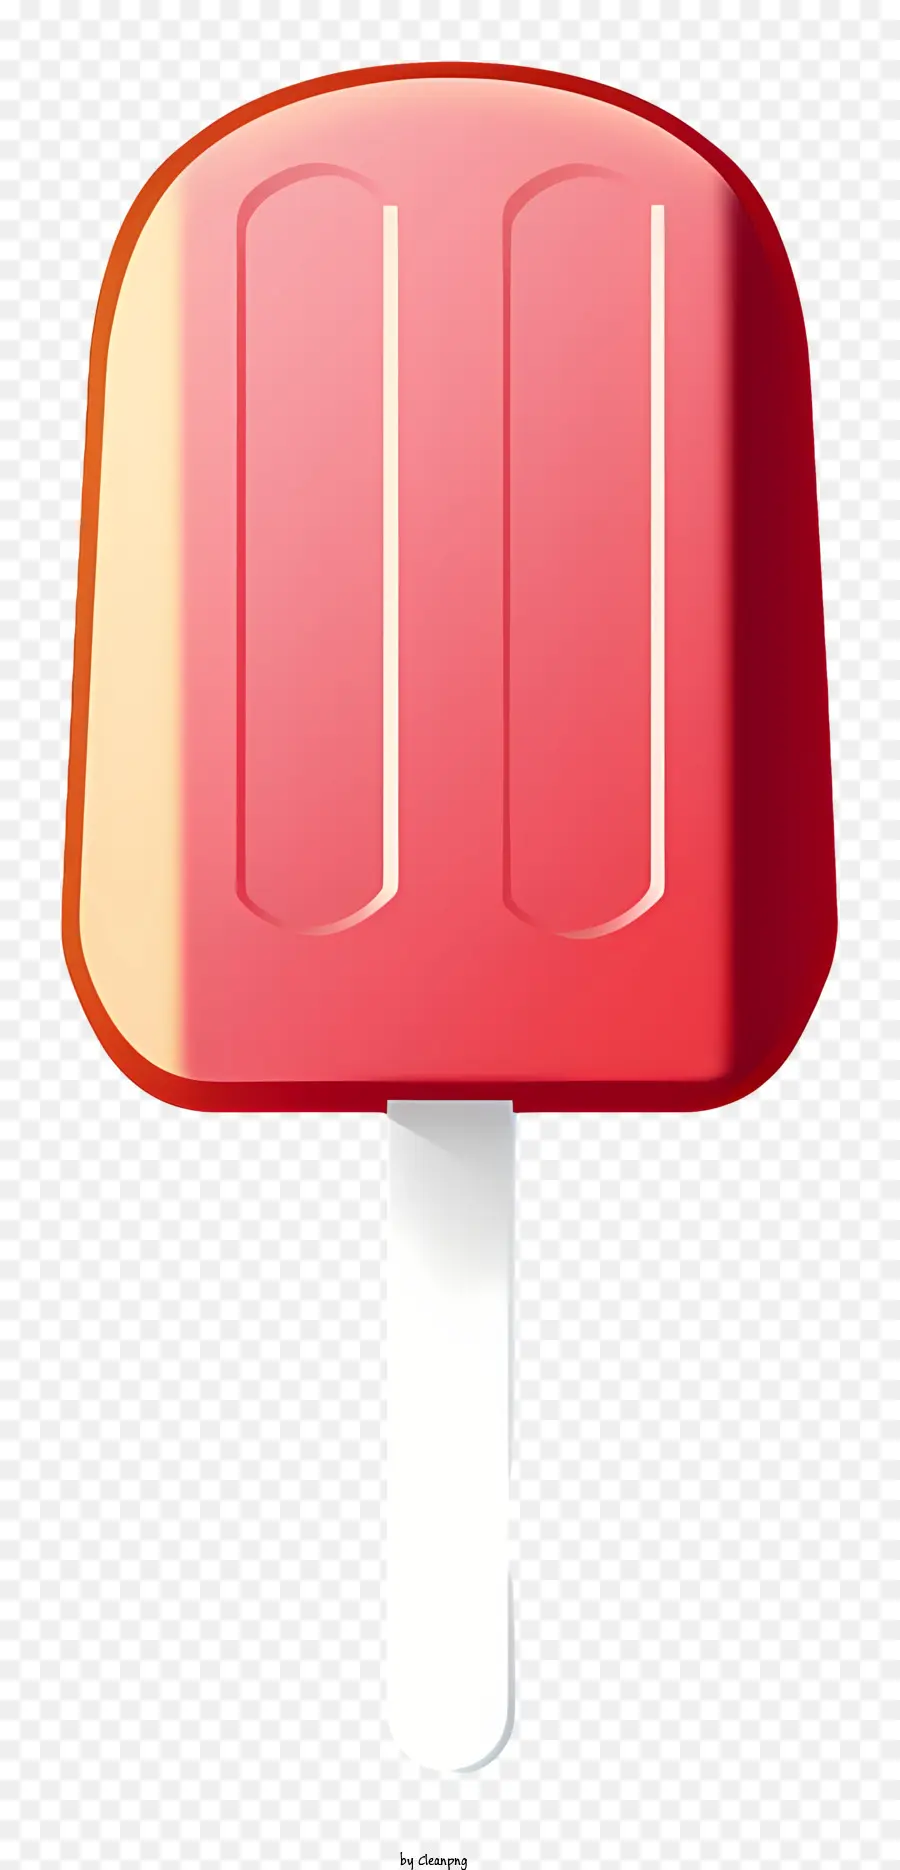 red popsicle white popsicle round popsicle flat bottom popsicle pointed tip popsicle